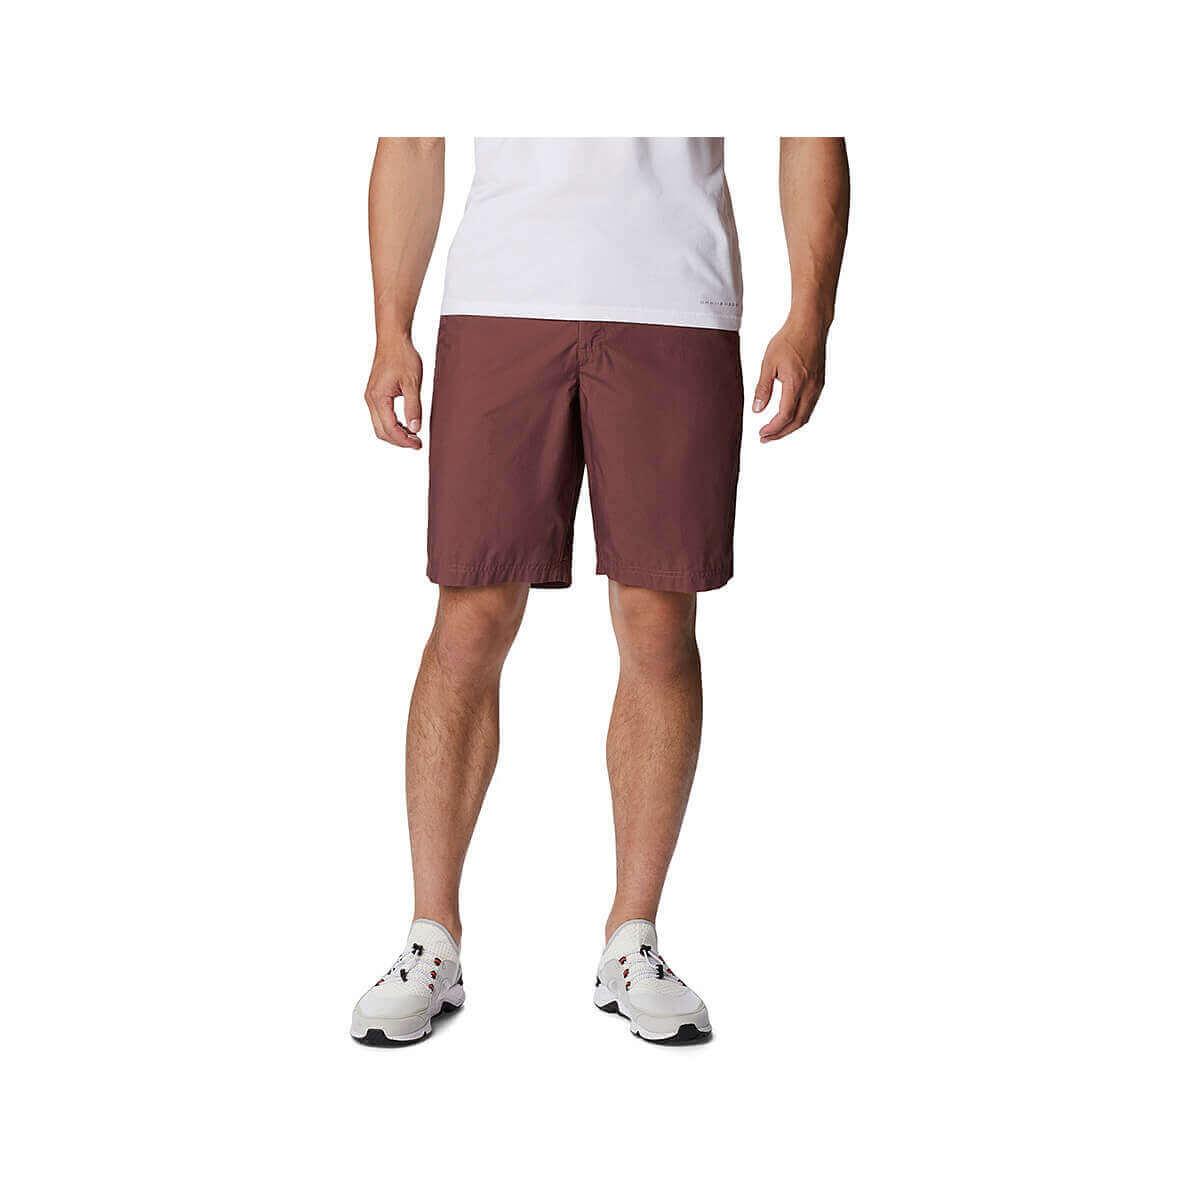  Men's Washed Out Shorts - 8 Inch